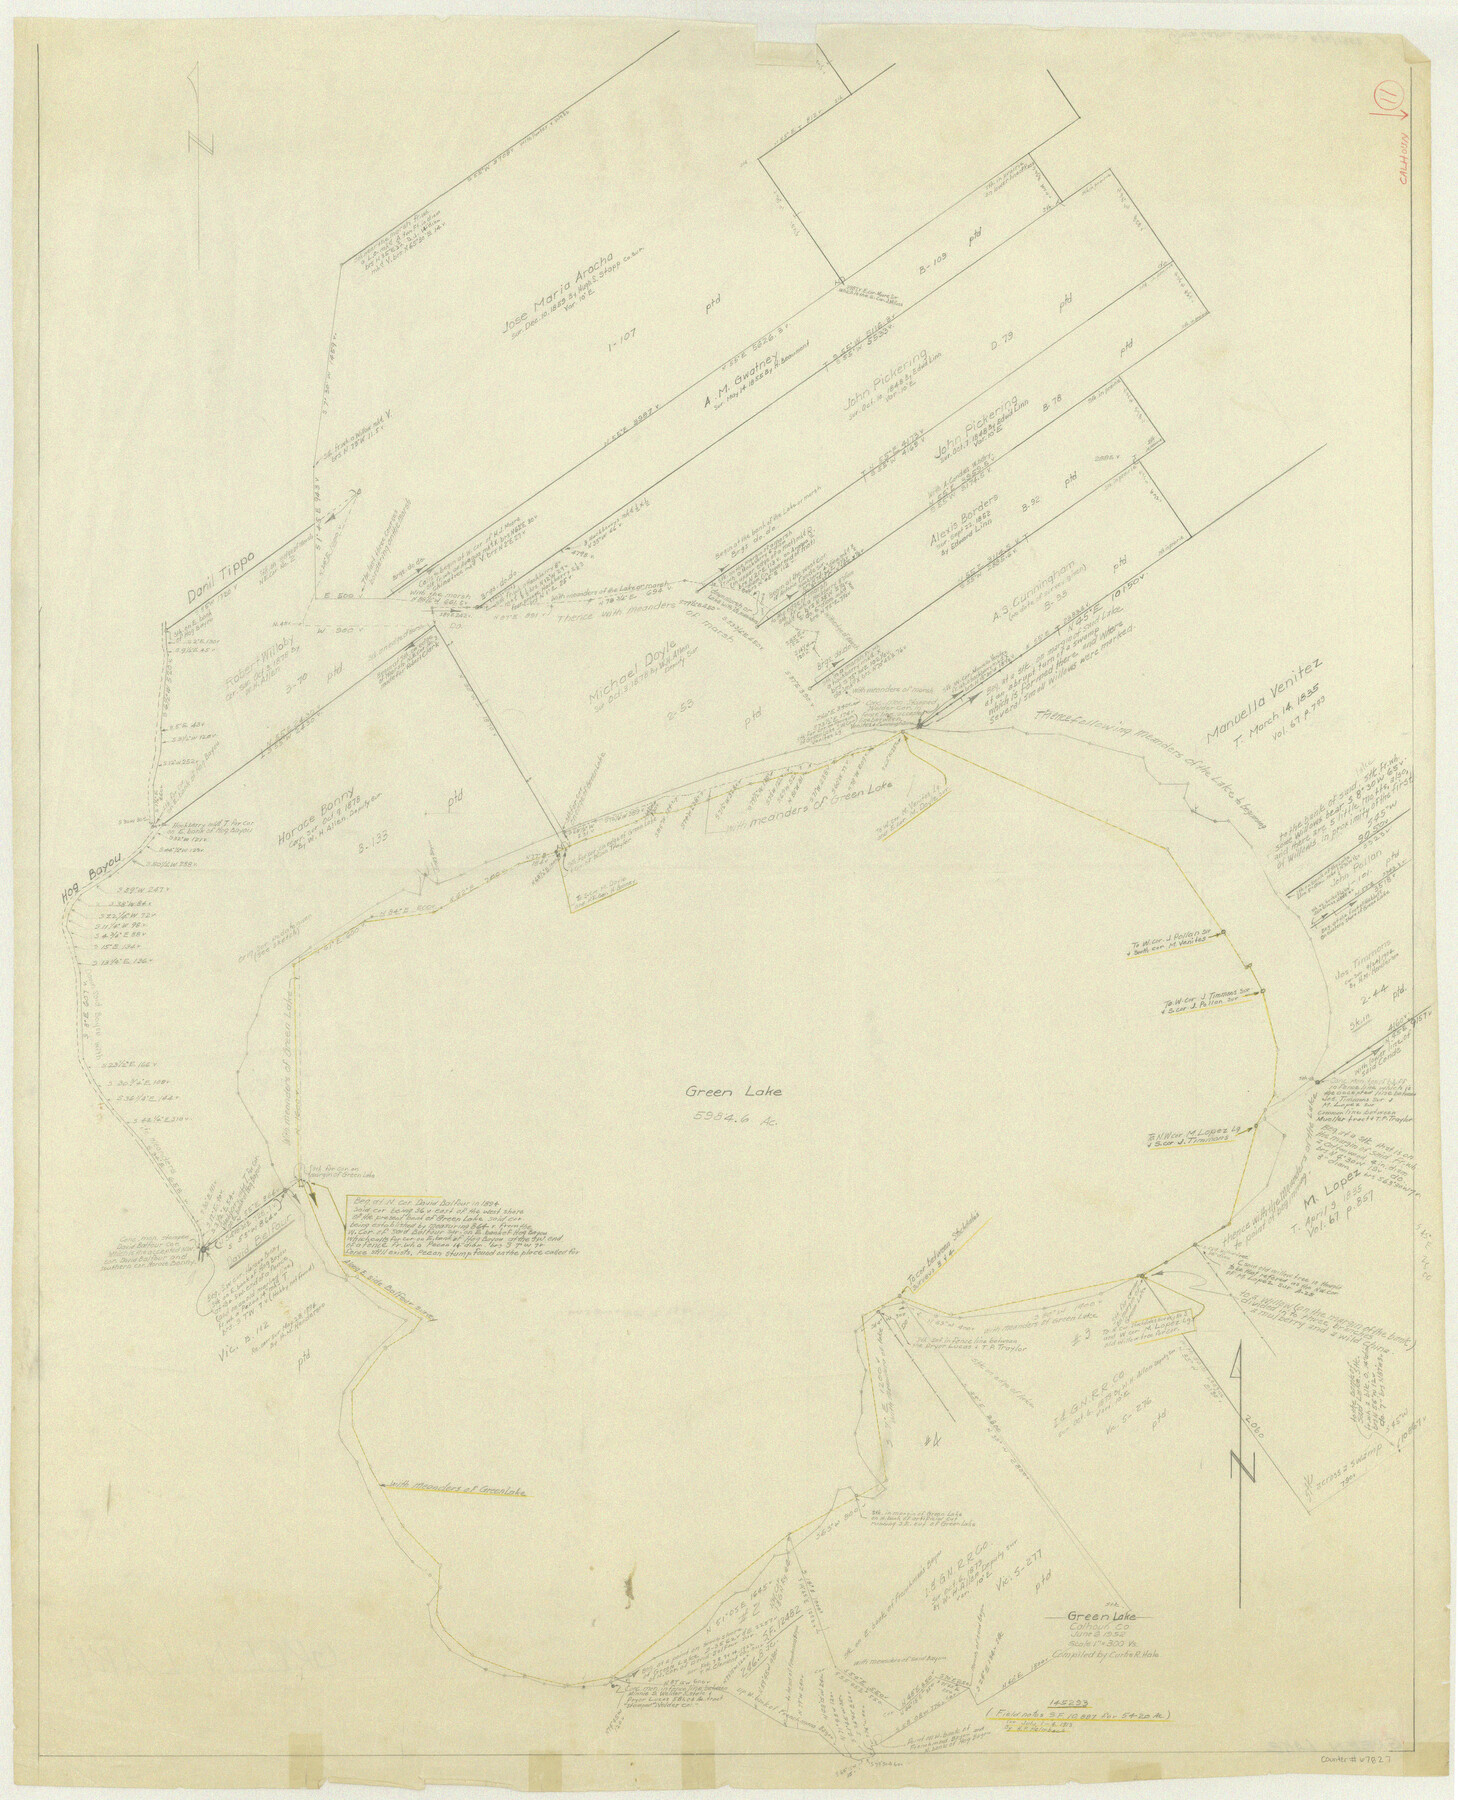 67827, Calhoun County Working Sketch 11, General Map Collection